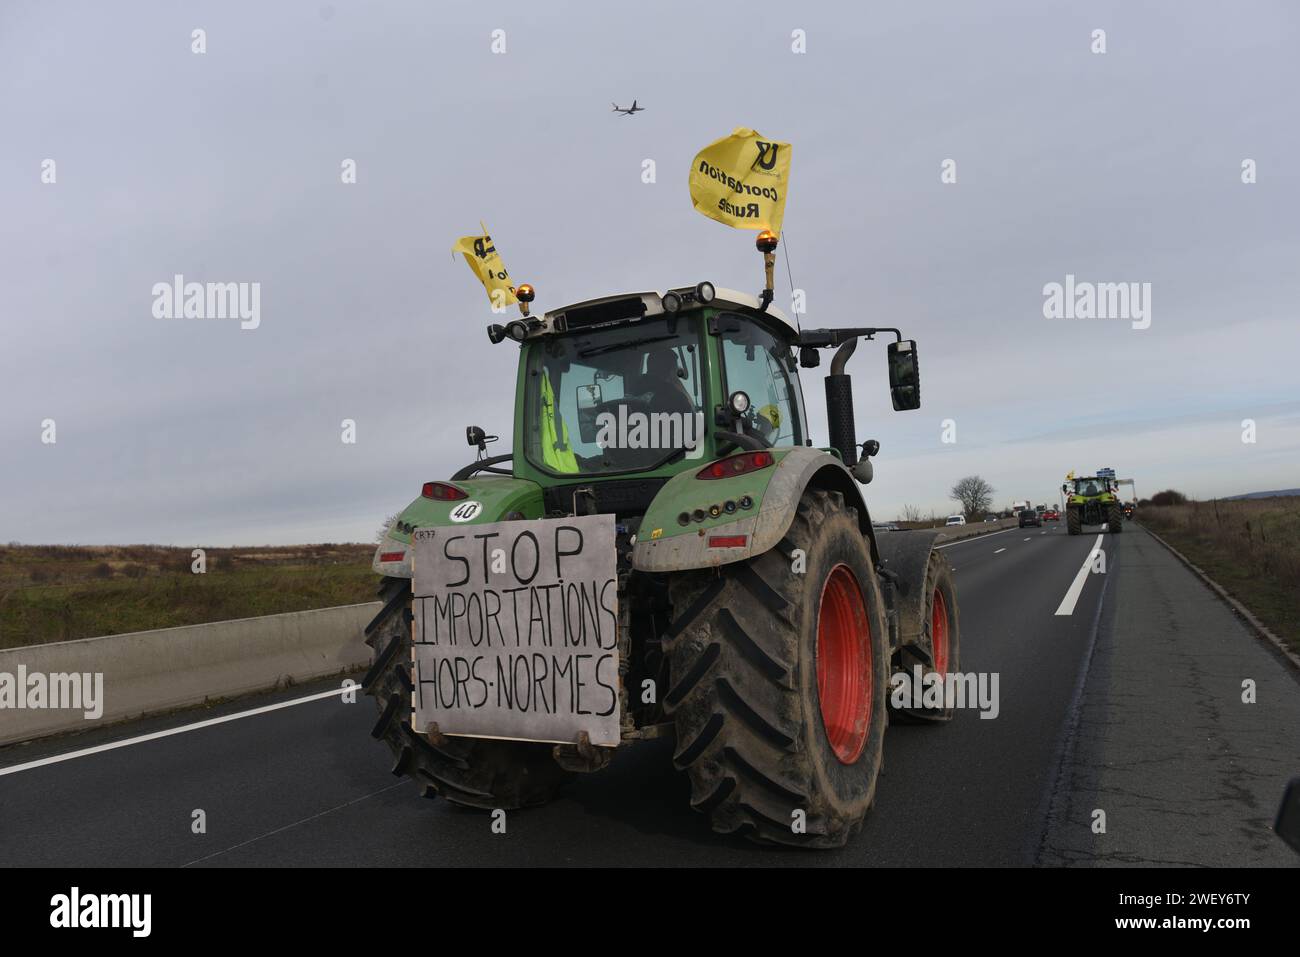 *** STRICTLY NO SALES TO FRENCH MEDIA OR PUBLISHERS - RIGHTS RESERVED ***January 27, 2024 - Mitry-Mory, France: French farmers from the Coordination Rurale union drive their tractors in protest towards Paris CDG airport, amid threats to block traffic around the French capital. Farmers angered over low remuneration, red tape, and unfair imports have vowed to continue protesting, maintaining traffic barricades on motorways, a day after the government's series of pro-agriculture measures. Stock Photo